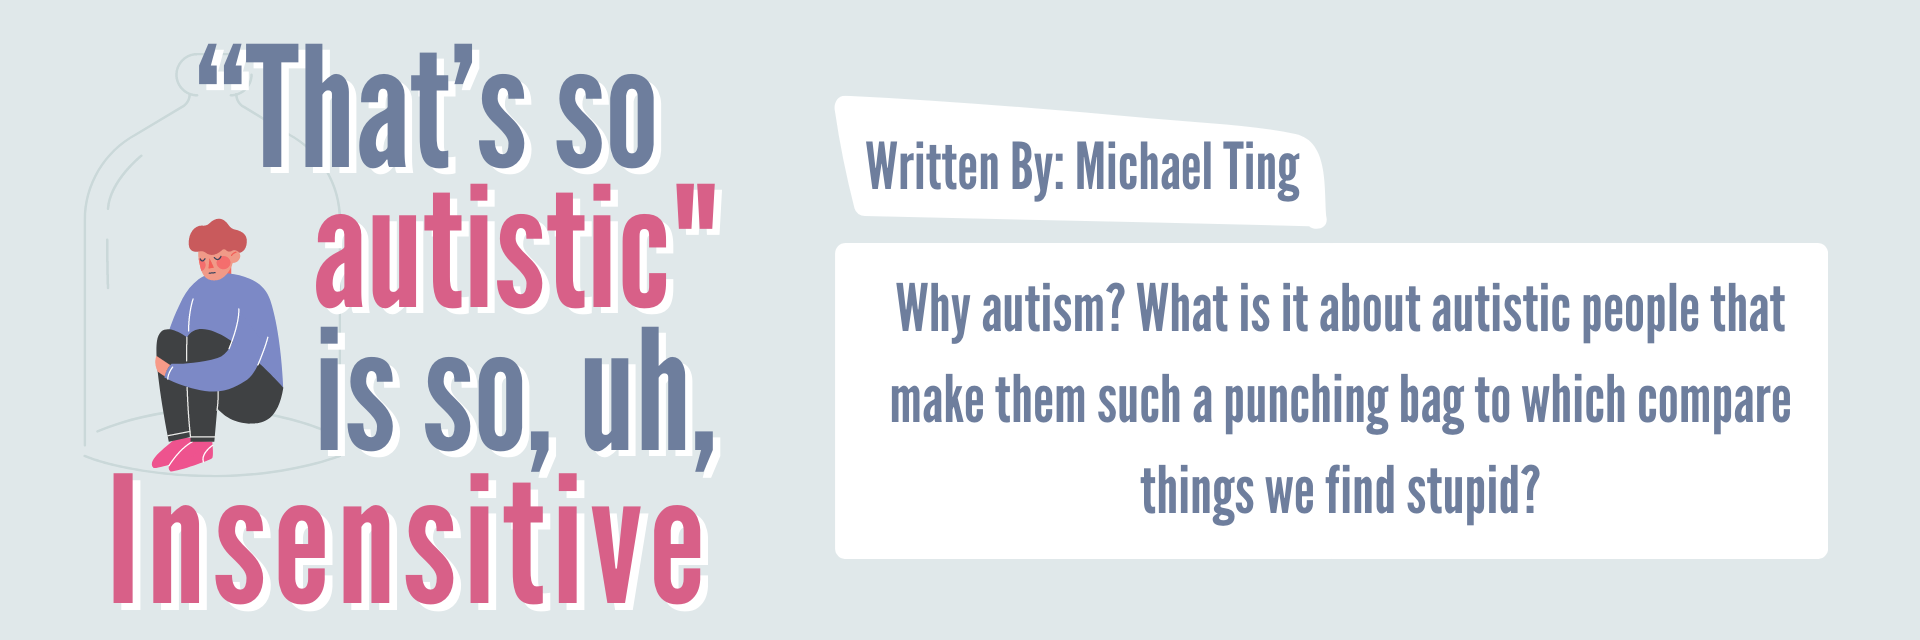 "That's so autistic is so, uh, Insensitive written by Michael Ting. Why autism? What is it about autistic people that make them such a punching bag to which compare things we find stupid?"